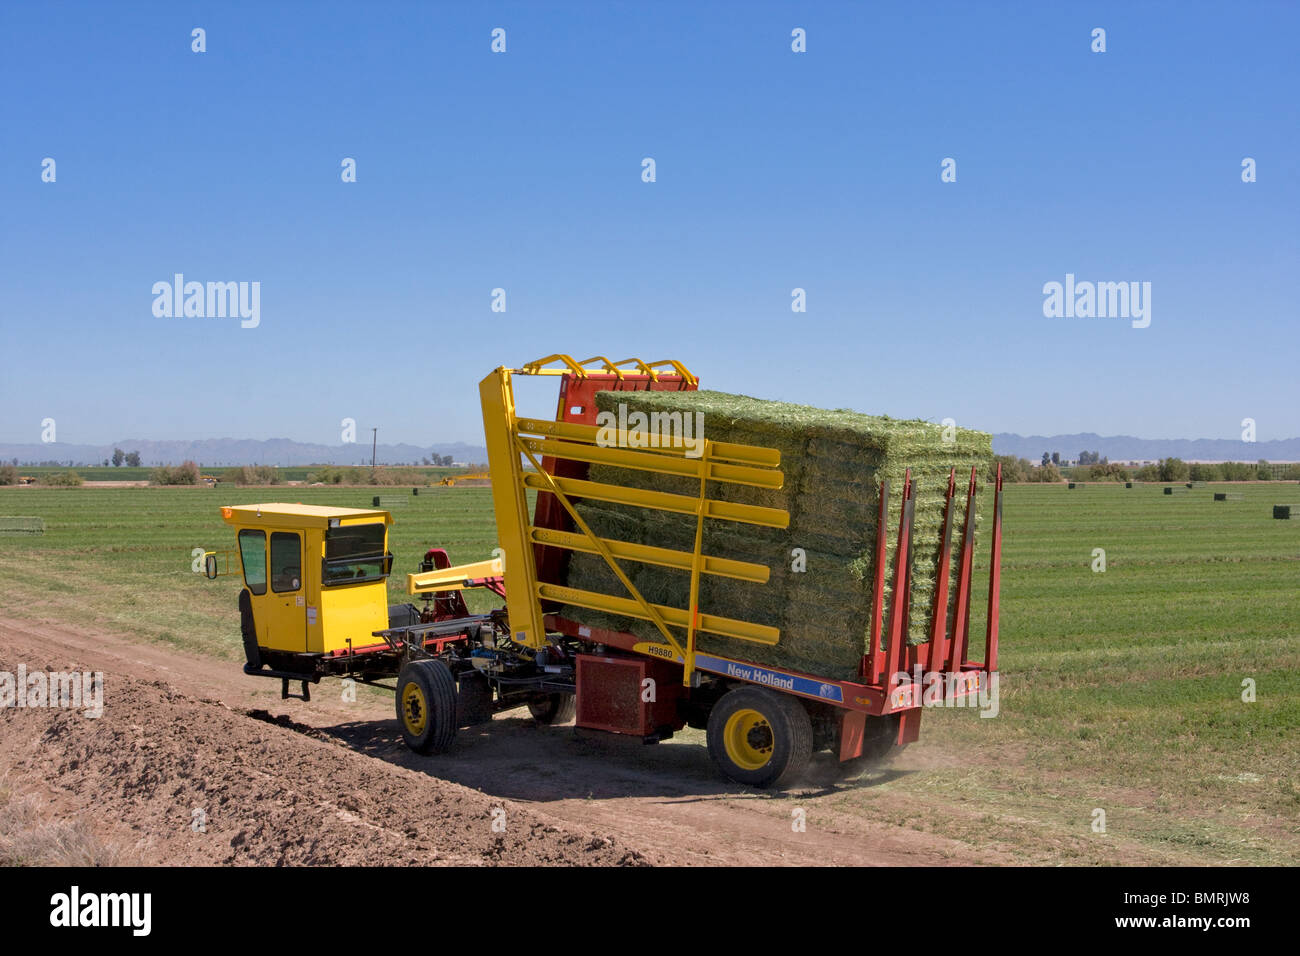 Field stacking machines collect large 1,800 lbs hay bales from an alfalfa field in the Imperial Valley of Southern California. Stock Photo